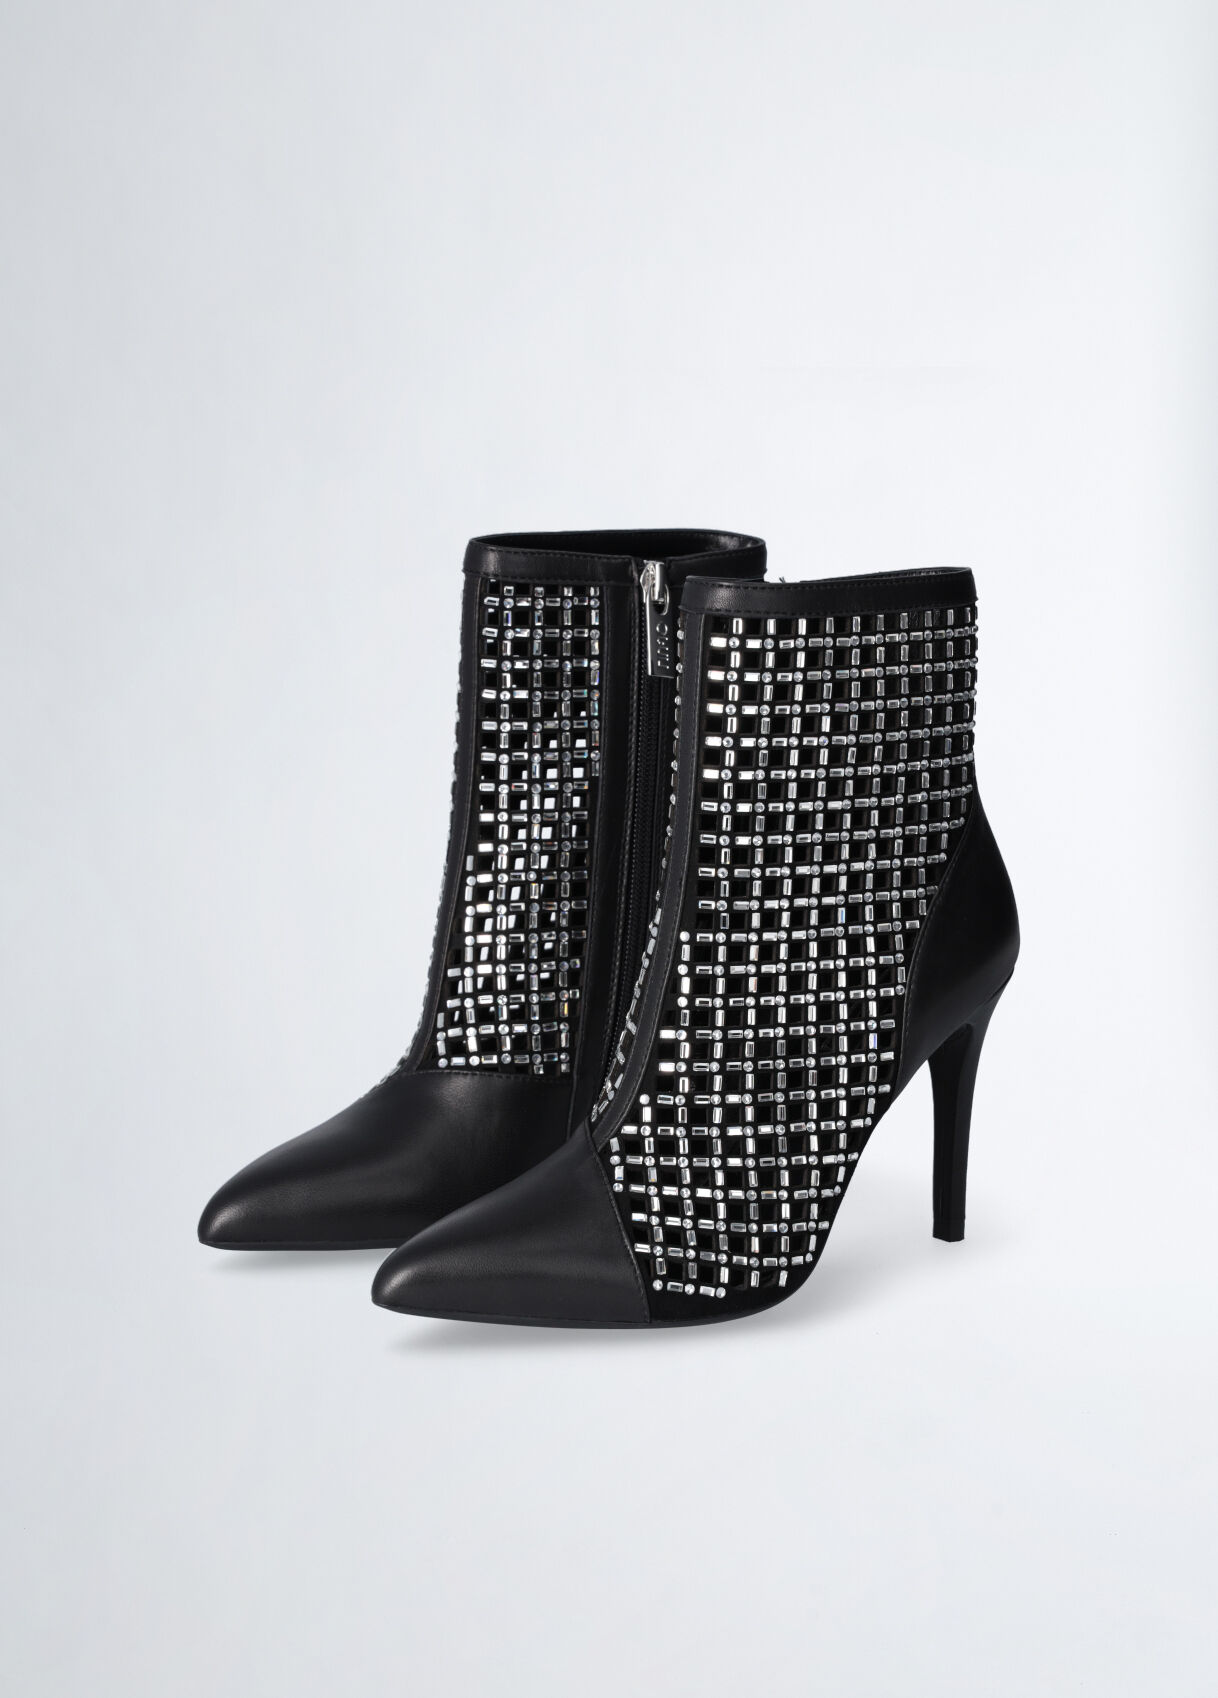 VALENTINO GARAVANI Studded suede ankle boots | THE OUTNET